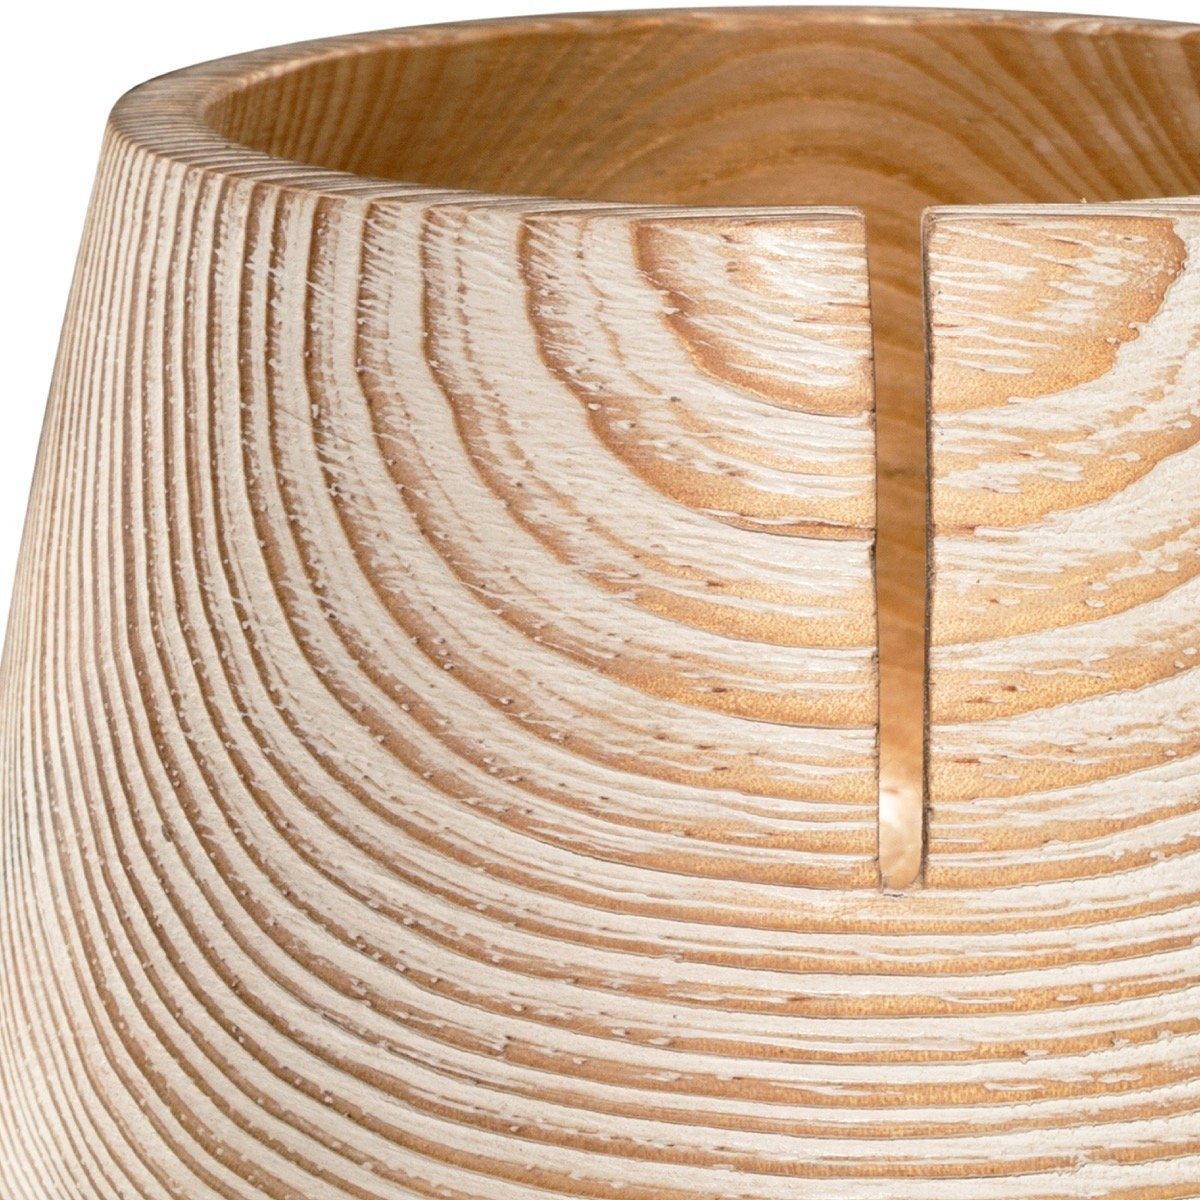 Wooden Yarn Bowl with Holes - Inspire Uplift